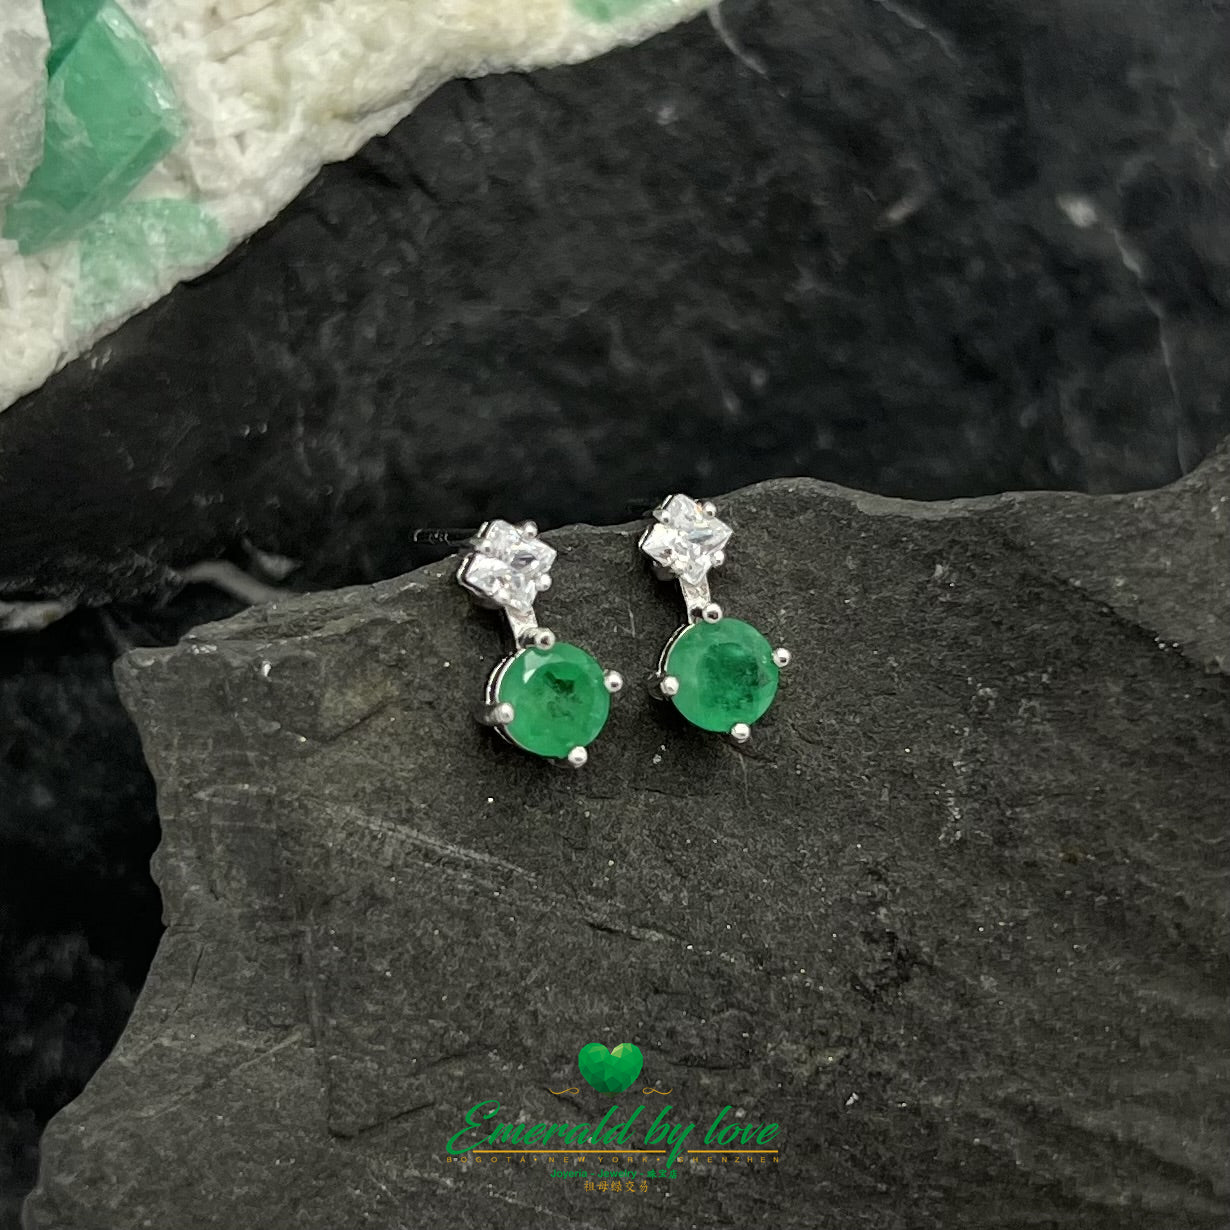 Silver Earrings with Central Round Emerald and Square Cubic Zirconia Accents